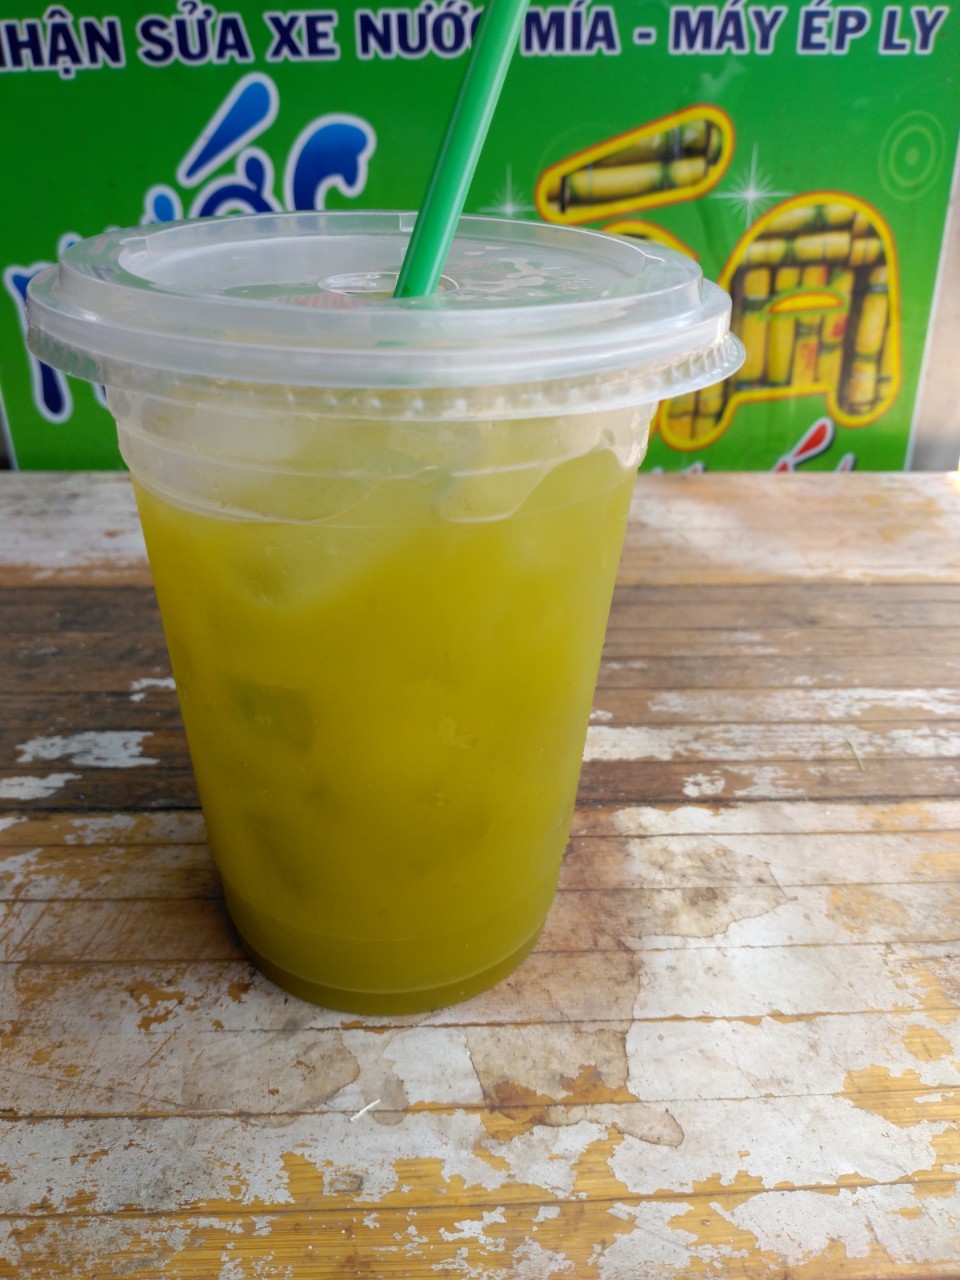 Sugarcane juice is one of juices that lots of people love and drink in summer